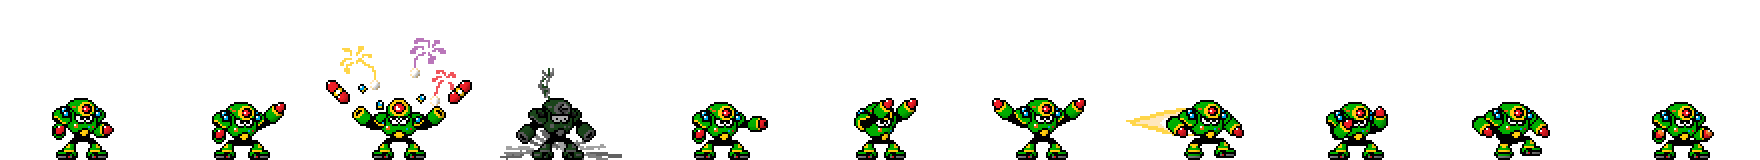 Napalm Man (Emerald Alt) | Base Sprite Right<div style="margin-top: 4px; letting-spacing: 1px; font-size: 90%; font-family: Courier New; color: rgb(159, 150, 172);">[robot:right:base]{napalm-man_alt2}</div>